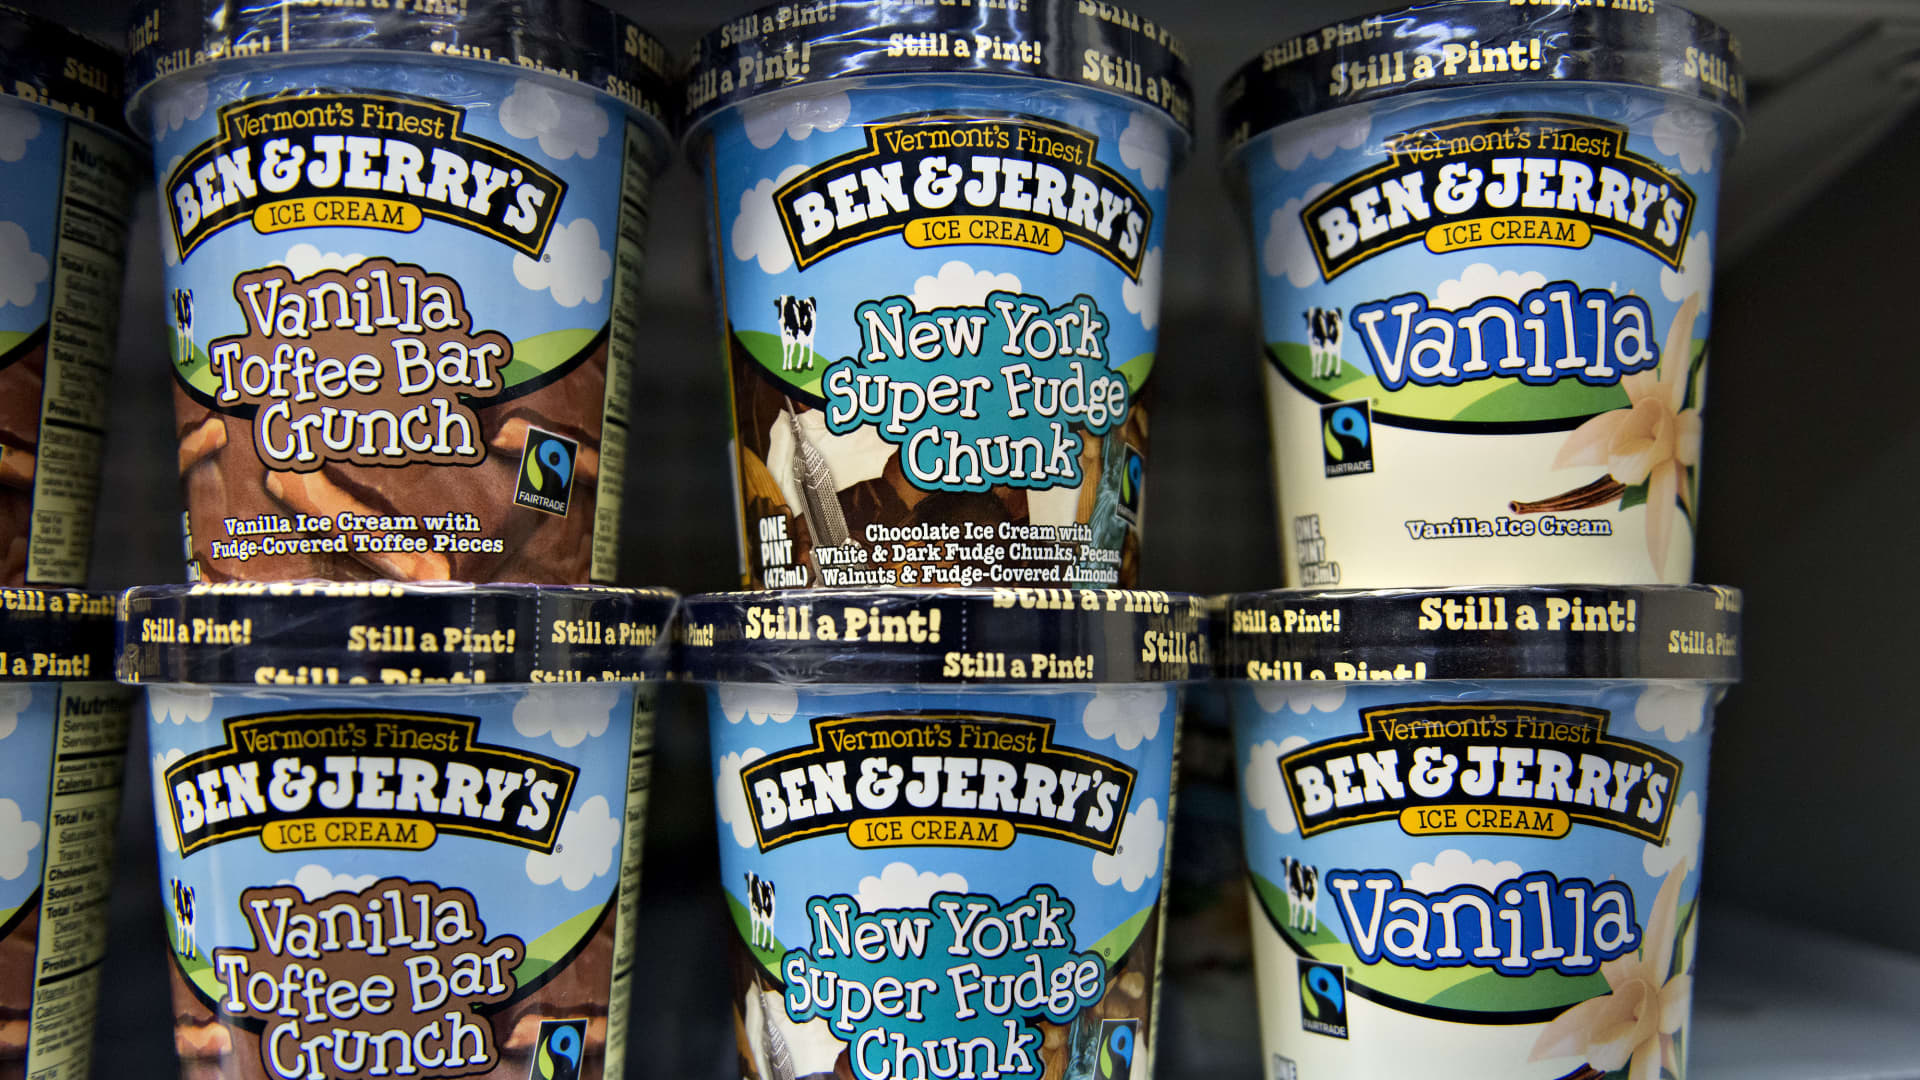 Ben & Jerry’s galvanizes customers to lobby for tighter laws